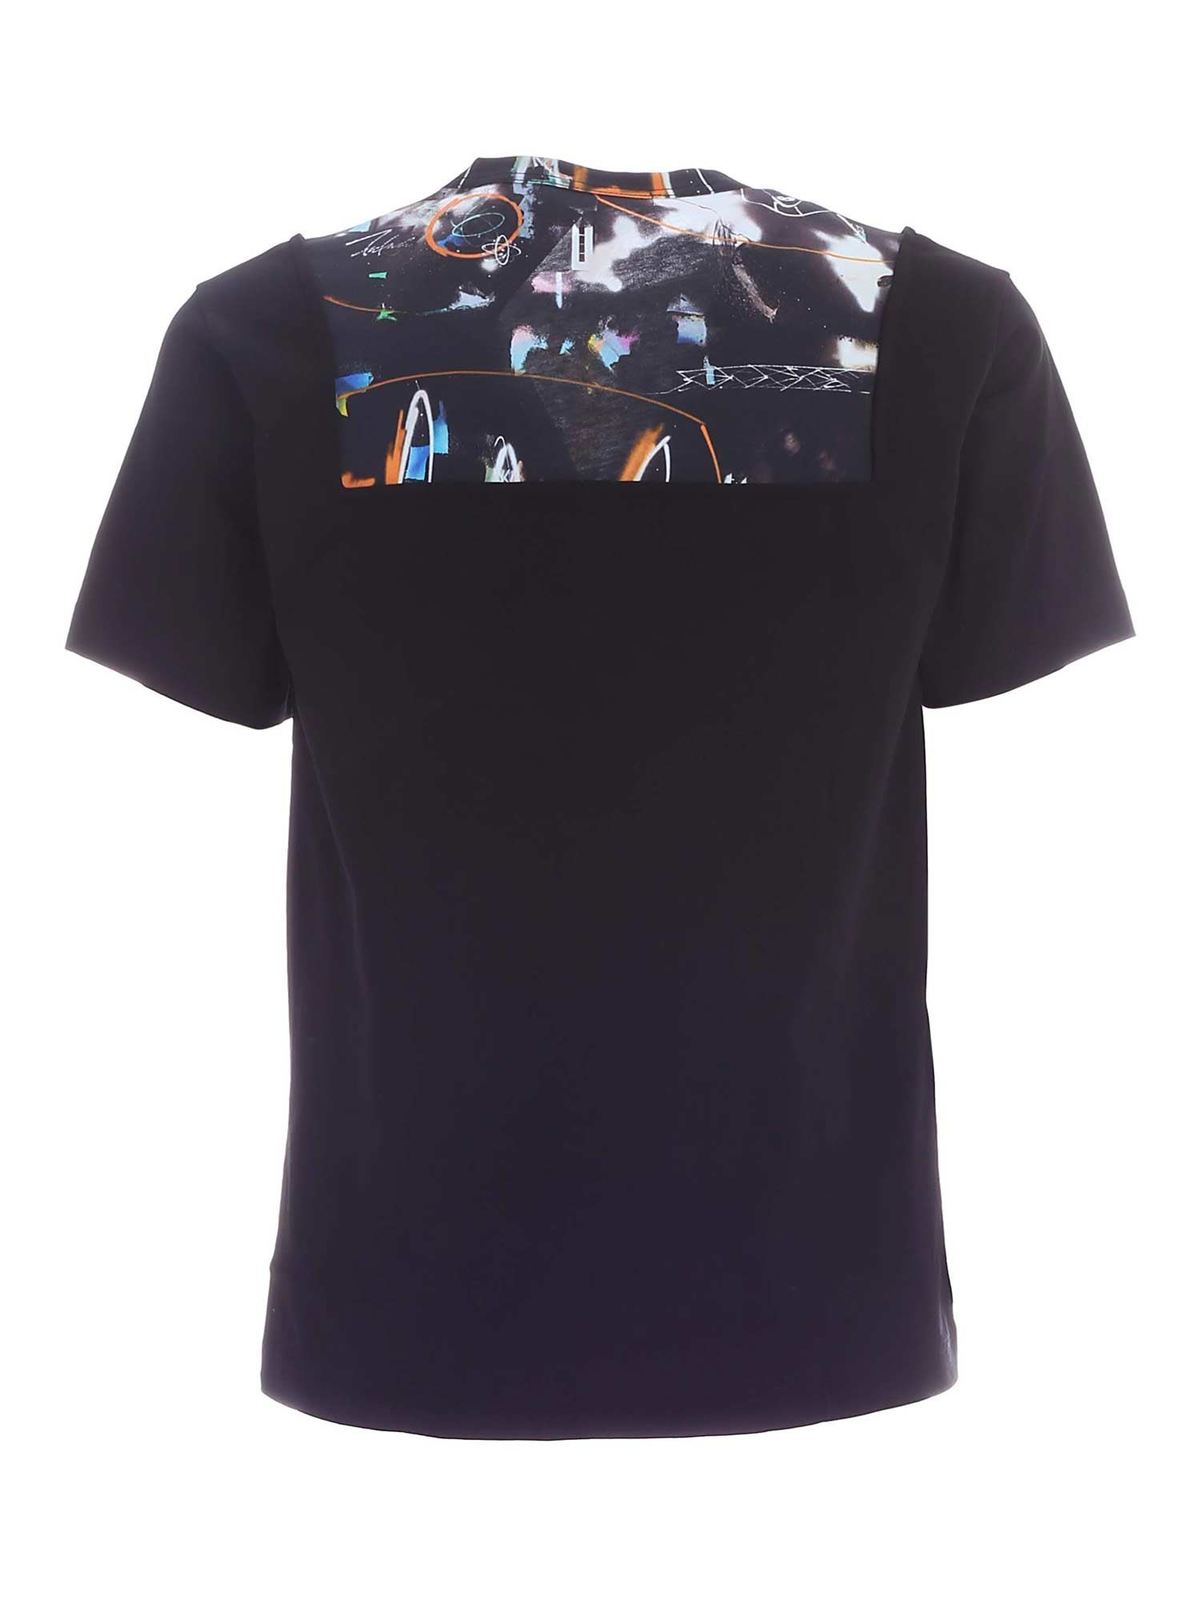 Abstract print T-shirt in black